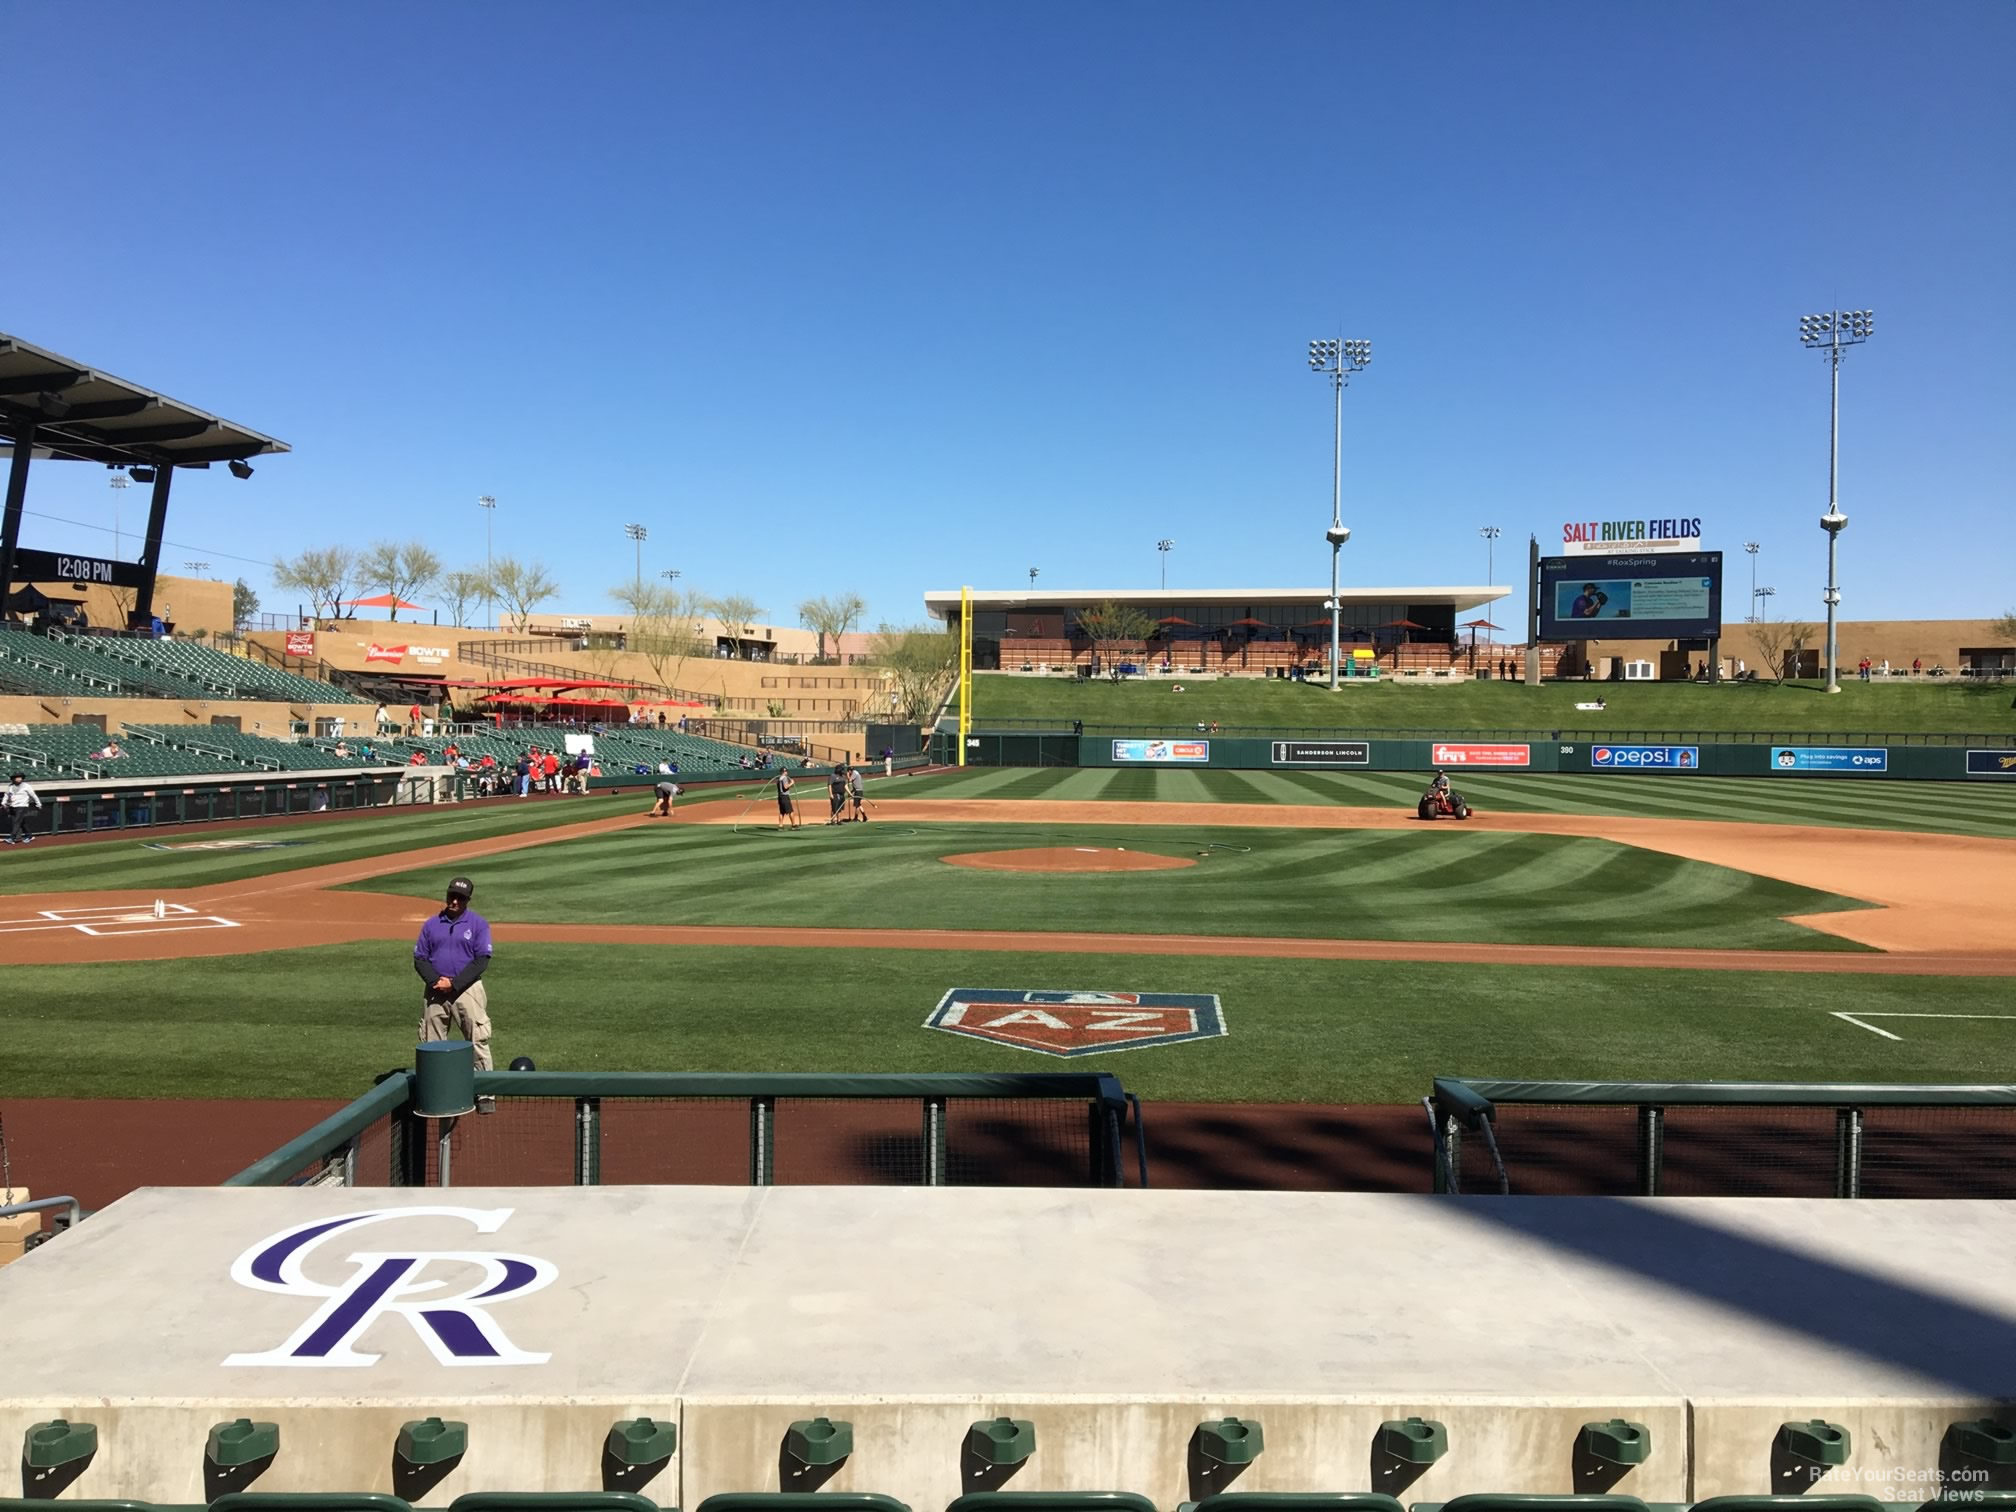 section 108, row 10 seat view  - salt river field at talking stick